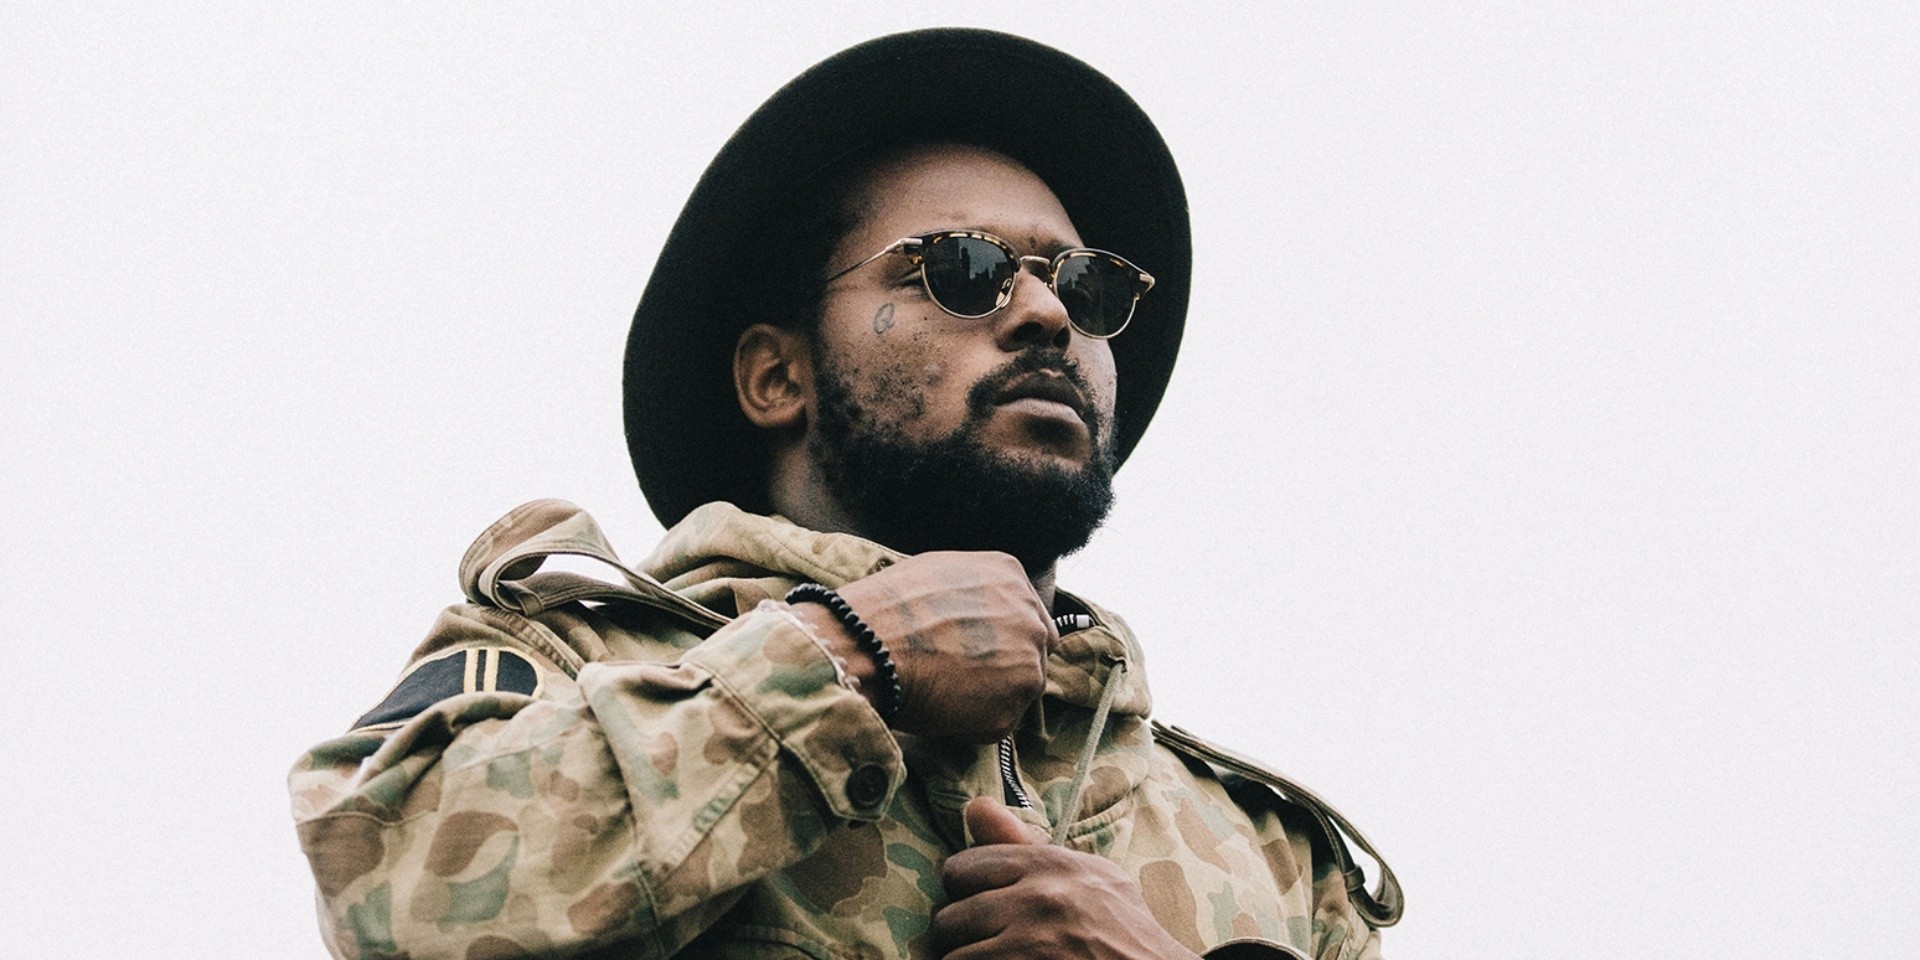 Schoolboy Q will release new music tomorrow